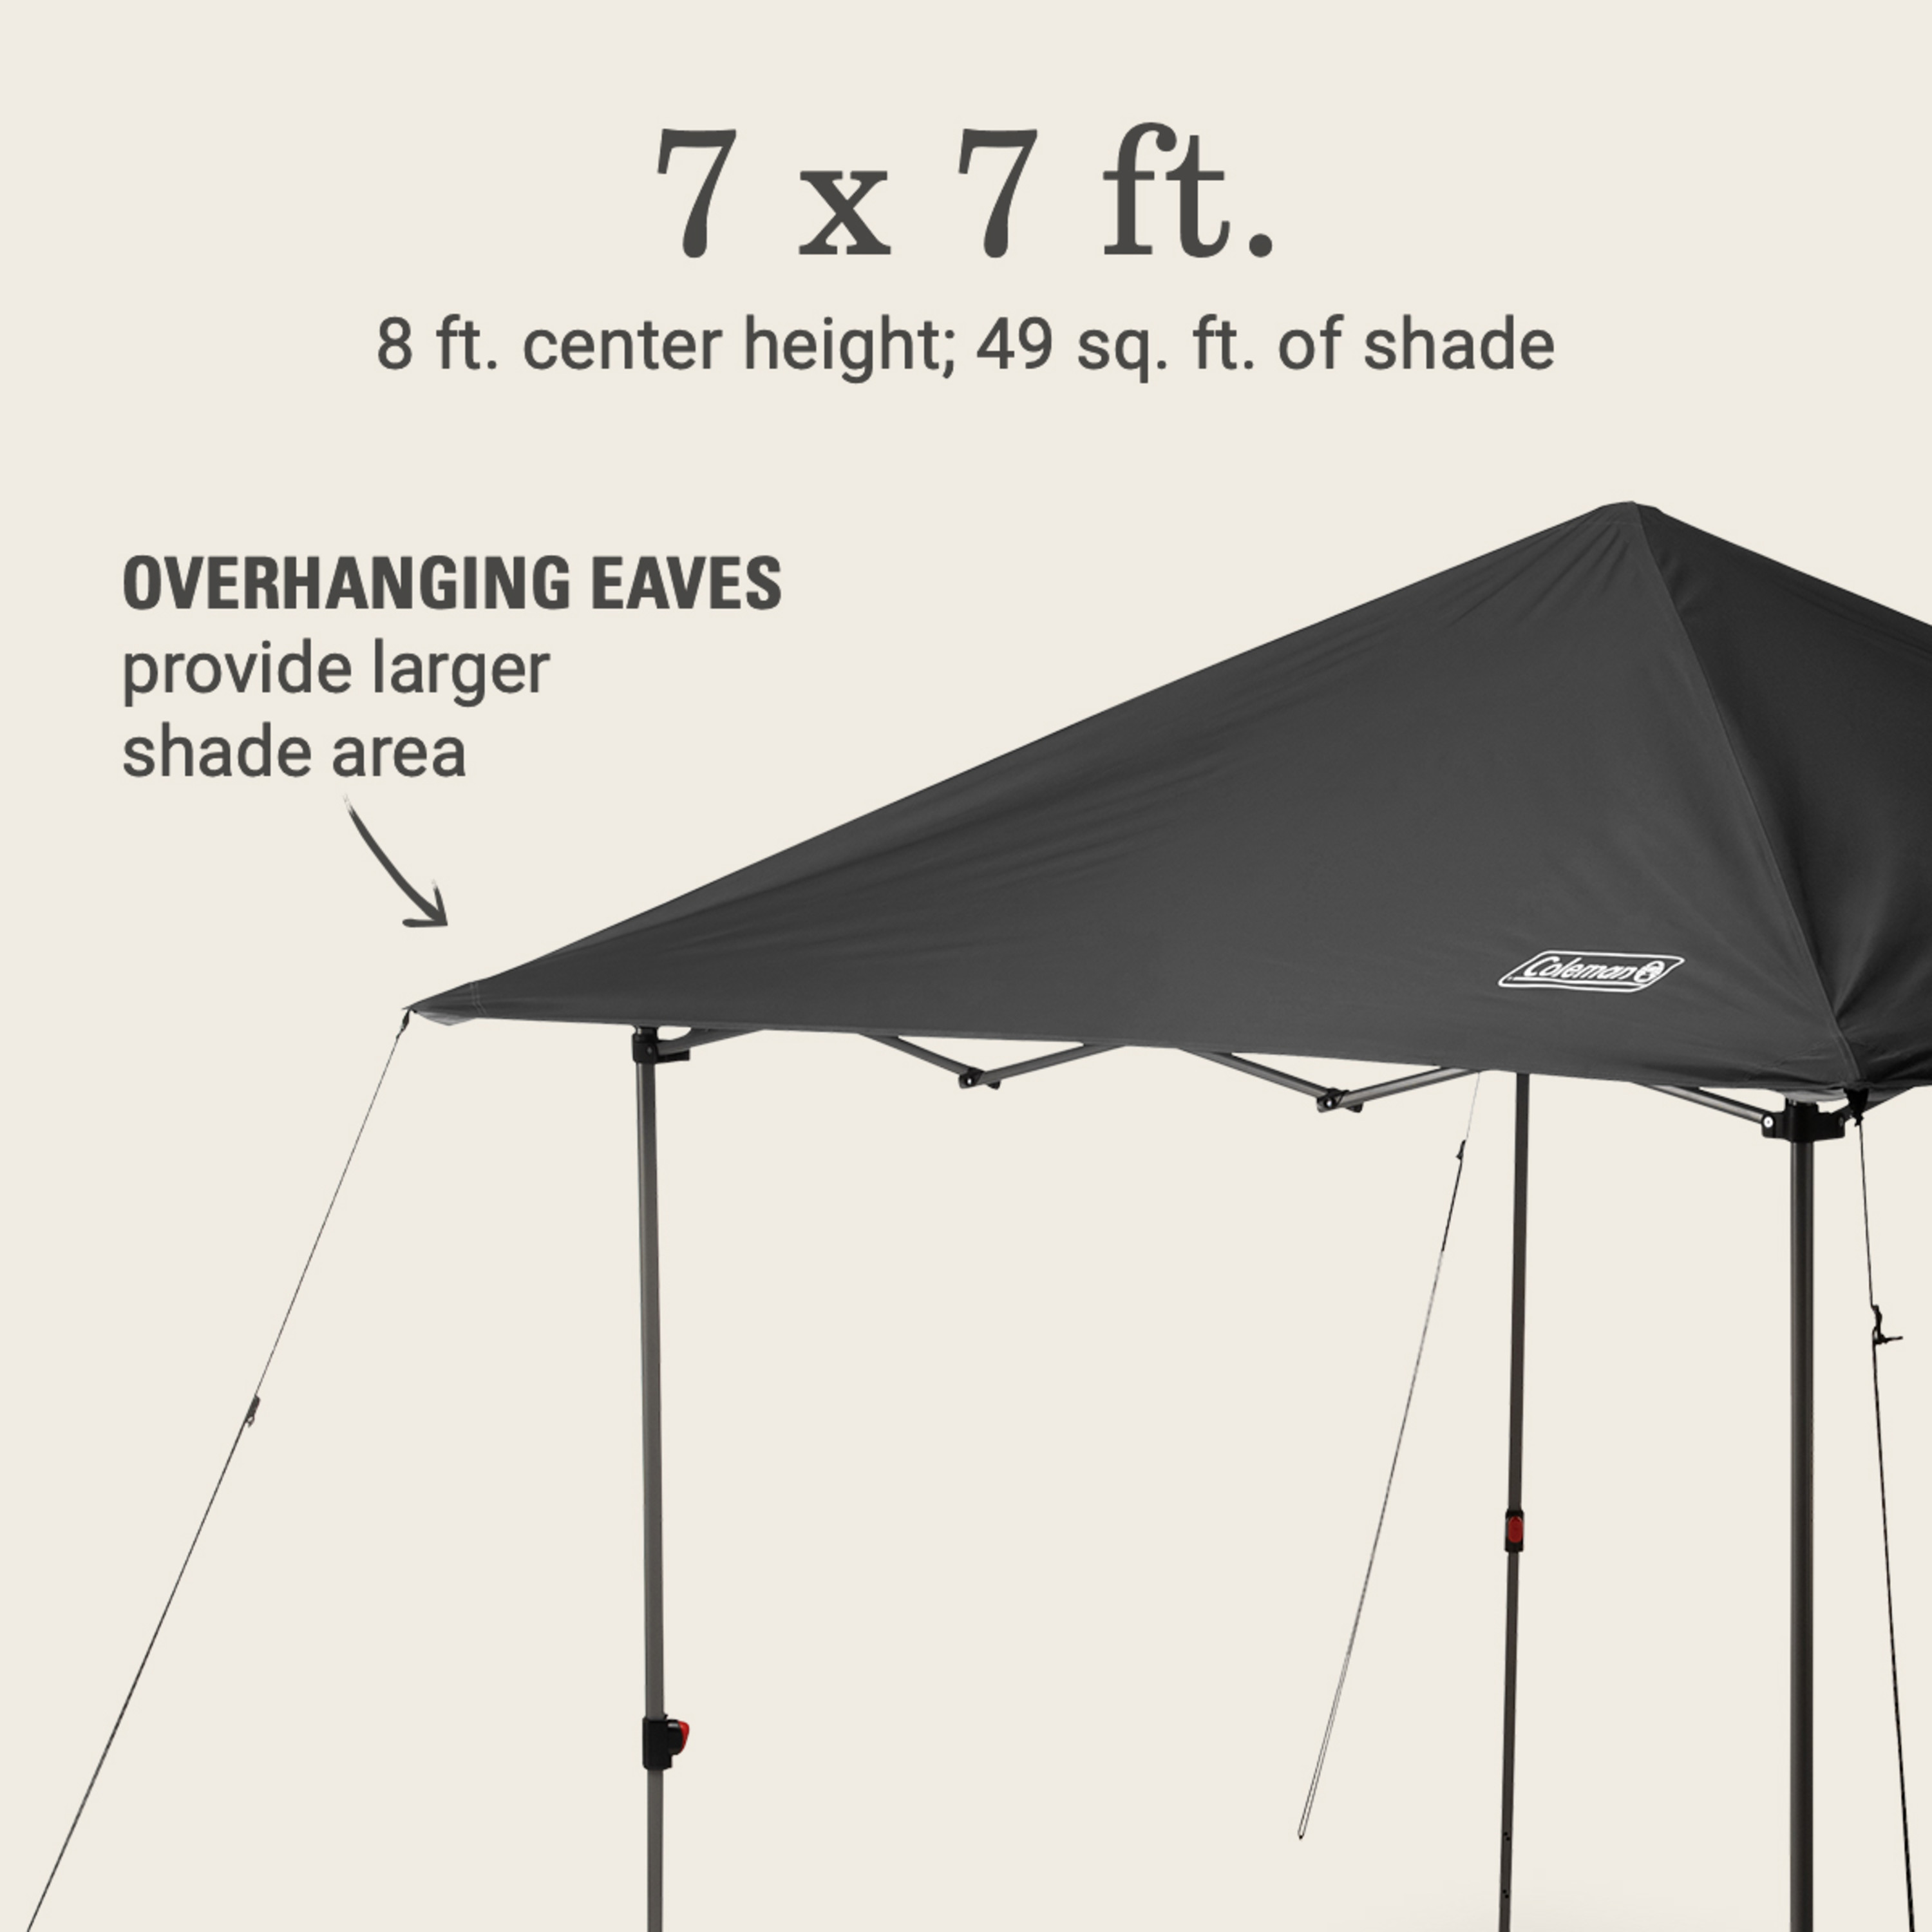 Coleman OASIS Lite 7 x 7 Canopy Tent - image 5 of 6